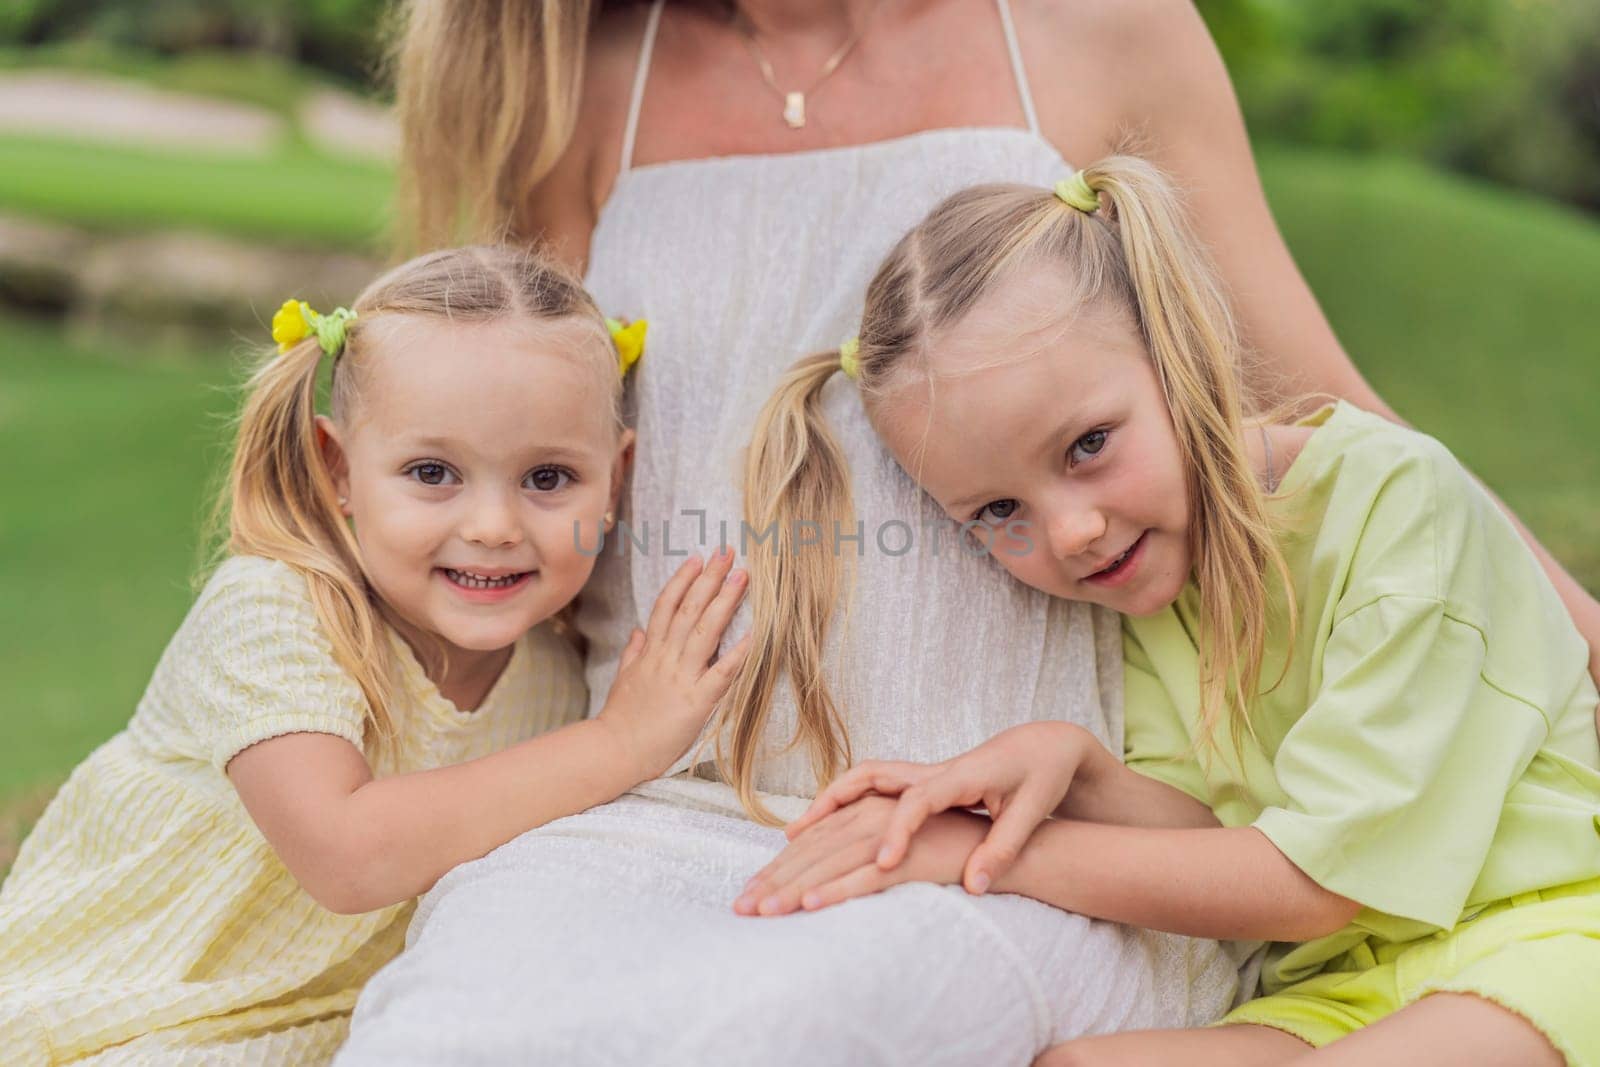 Sisters' love blooms as they tenderly embrace their mother's pregnant belly, sharing anticipation and affection for their soon-to-arrive sibling.